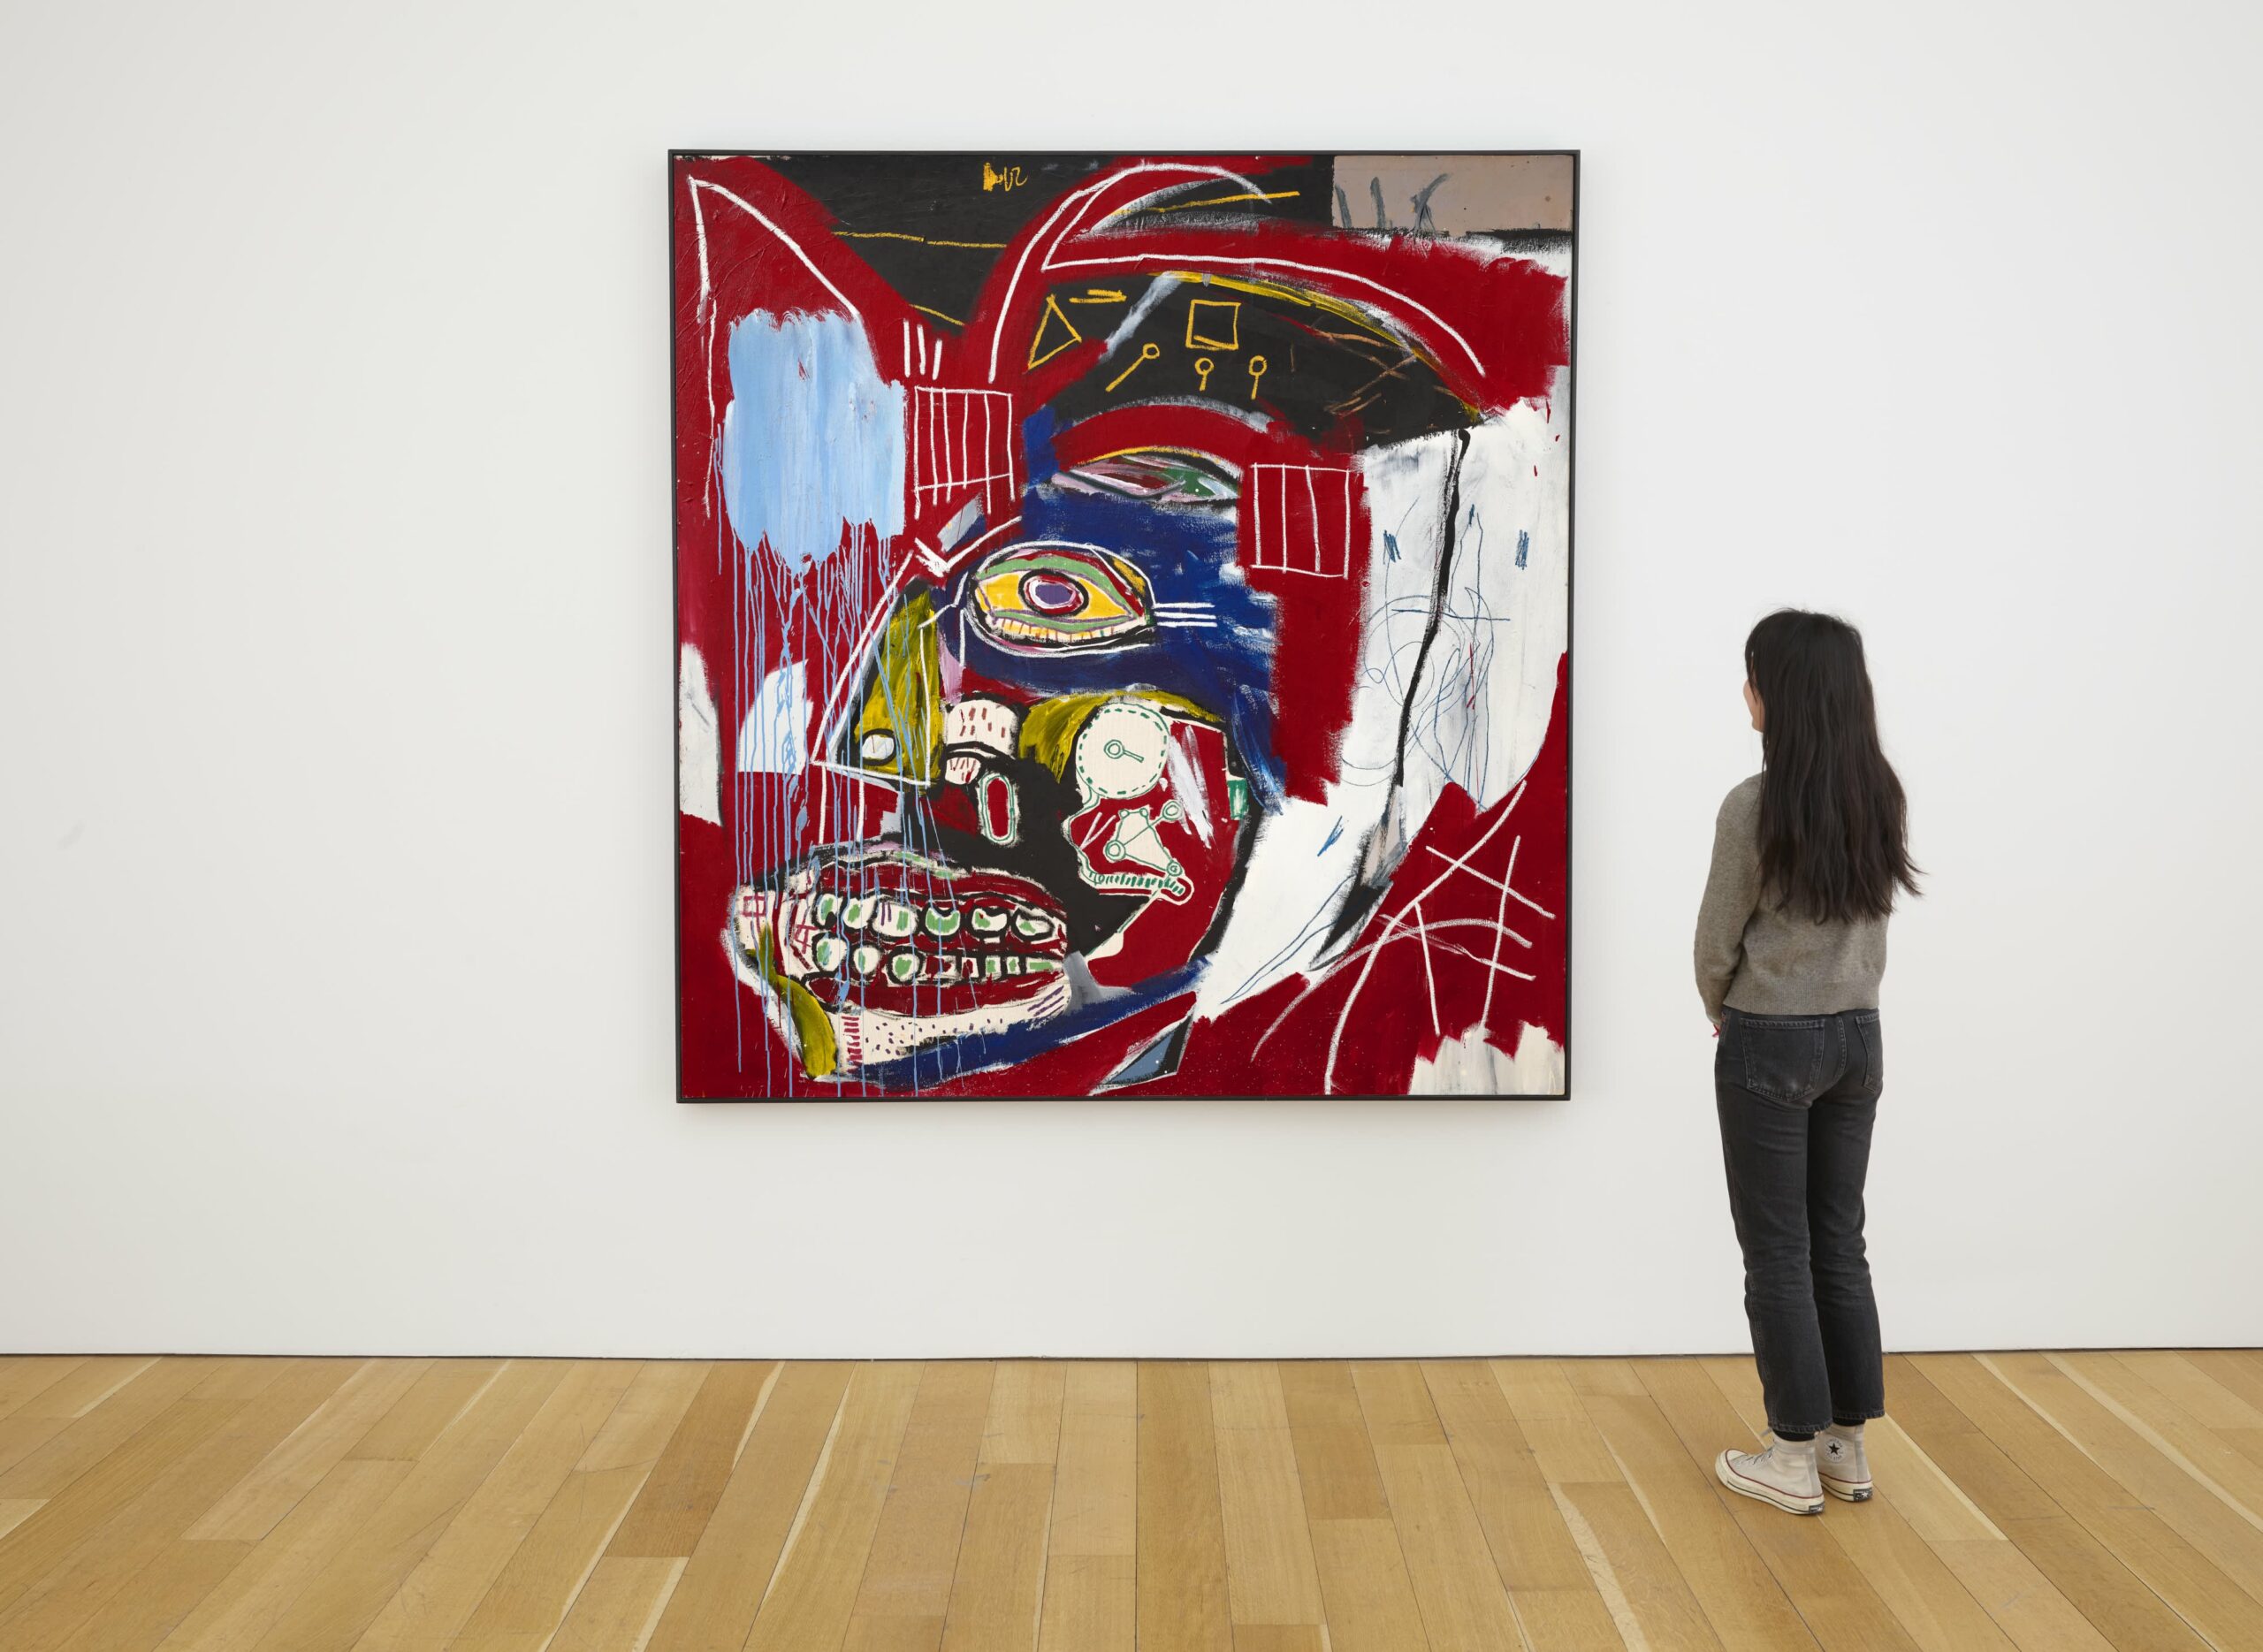 Uncommon Basquiat ‘cranium’ portray might fetch greater than $50 million